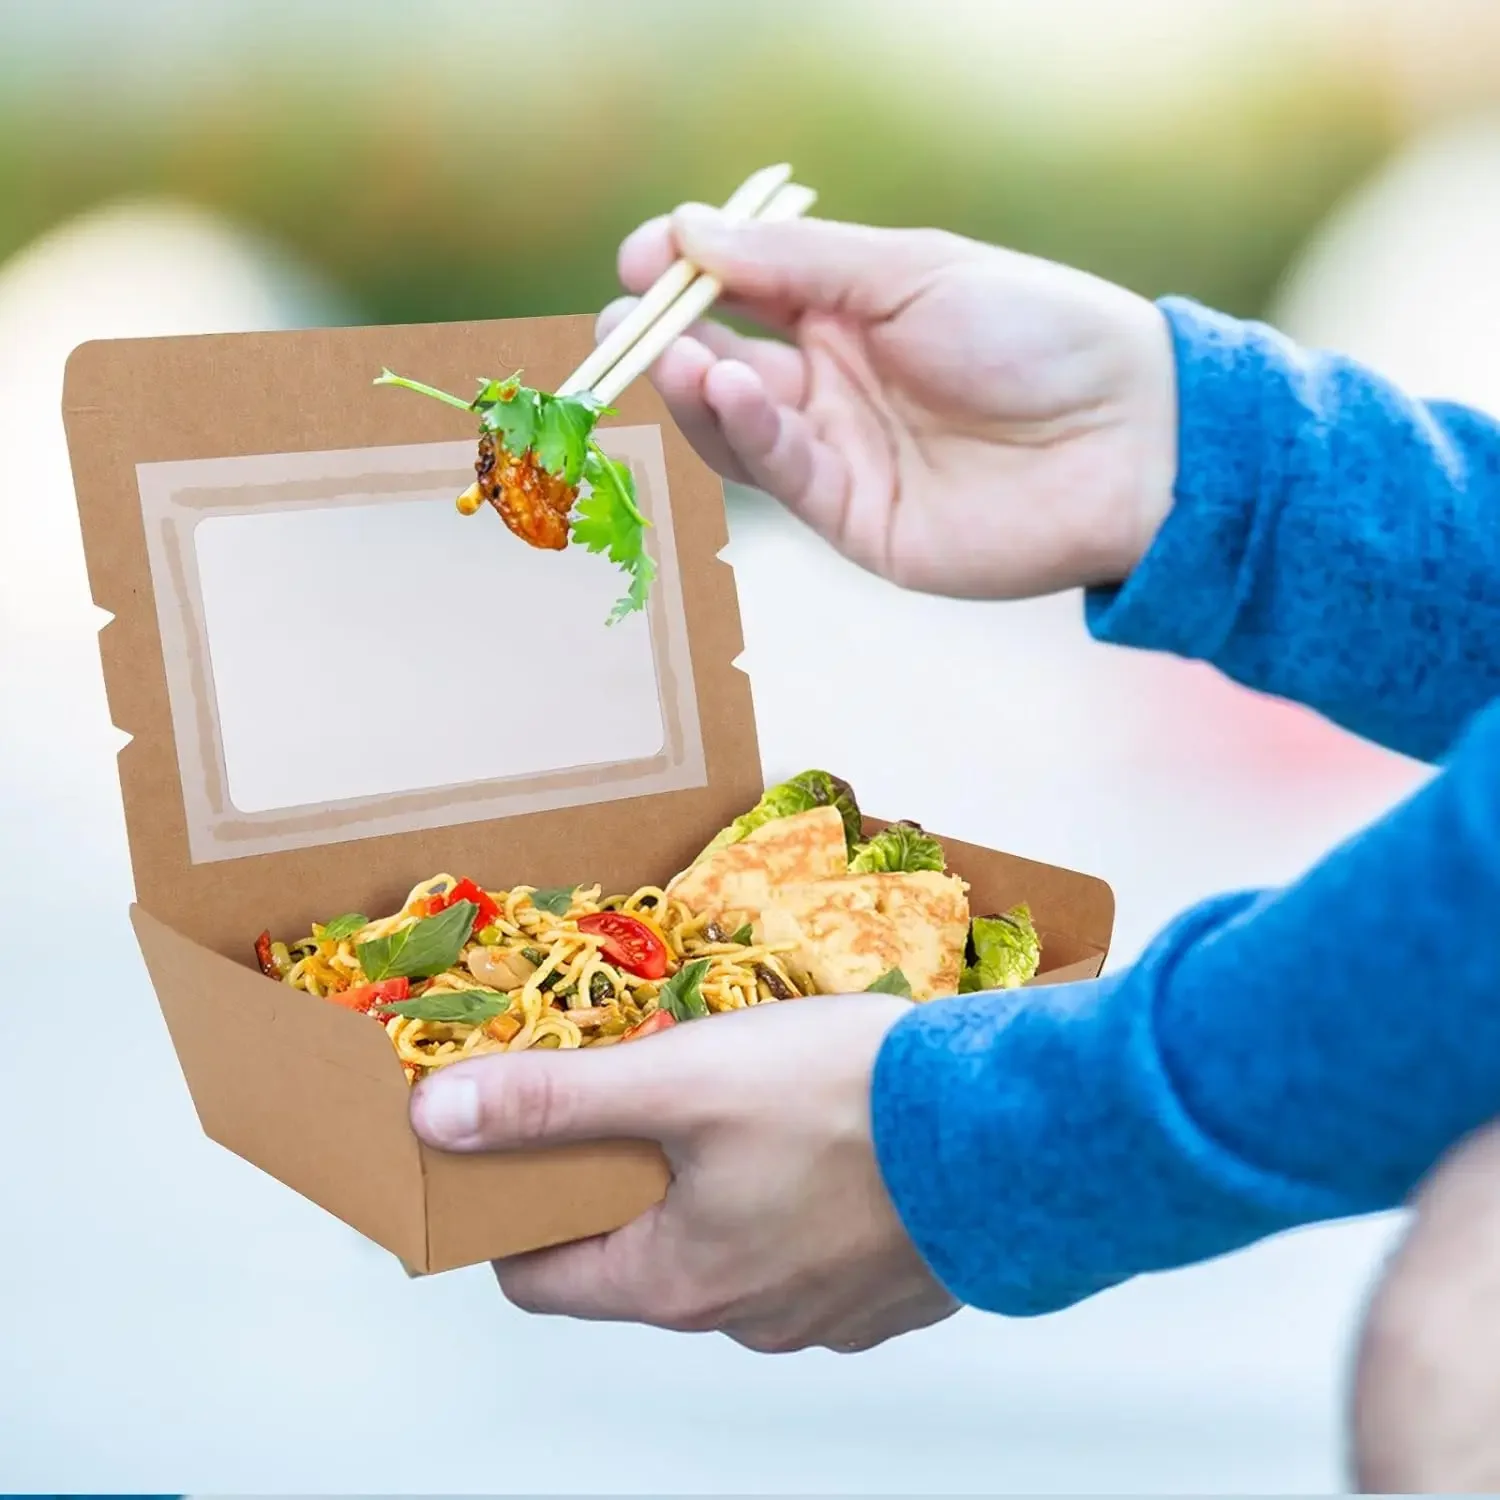 https://ae01.alicdn.com/kf/Sa2ad893da8f1408a8406e98a45fe7c9bl/Kraft-paper-food-box-Disposable-Kraft-Paper-Food-Container-Takeout-Box-Party-lunch-Box-Out-Food.jpg